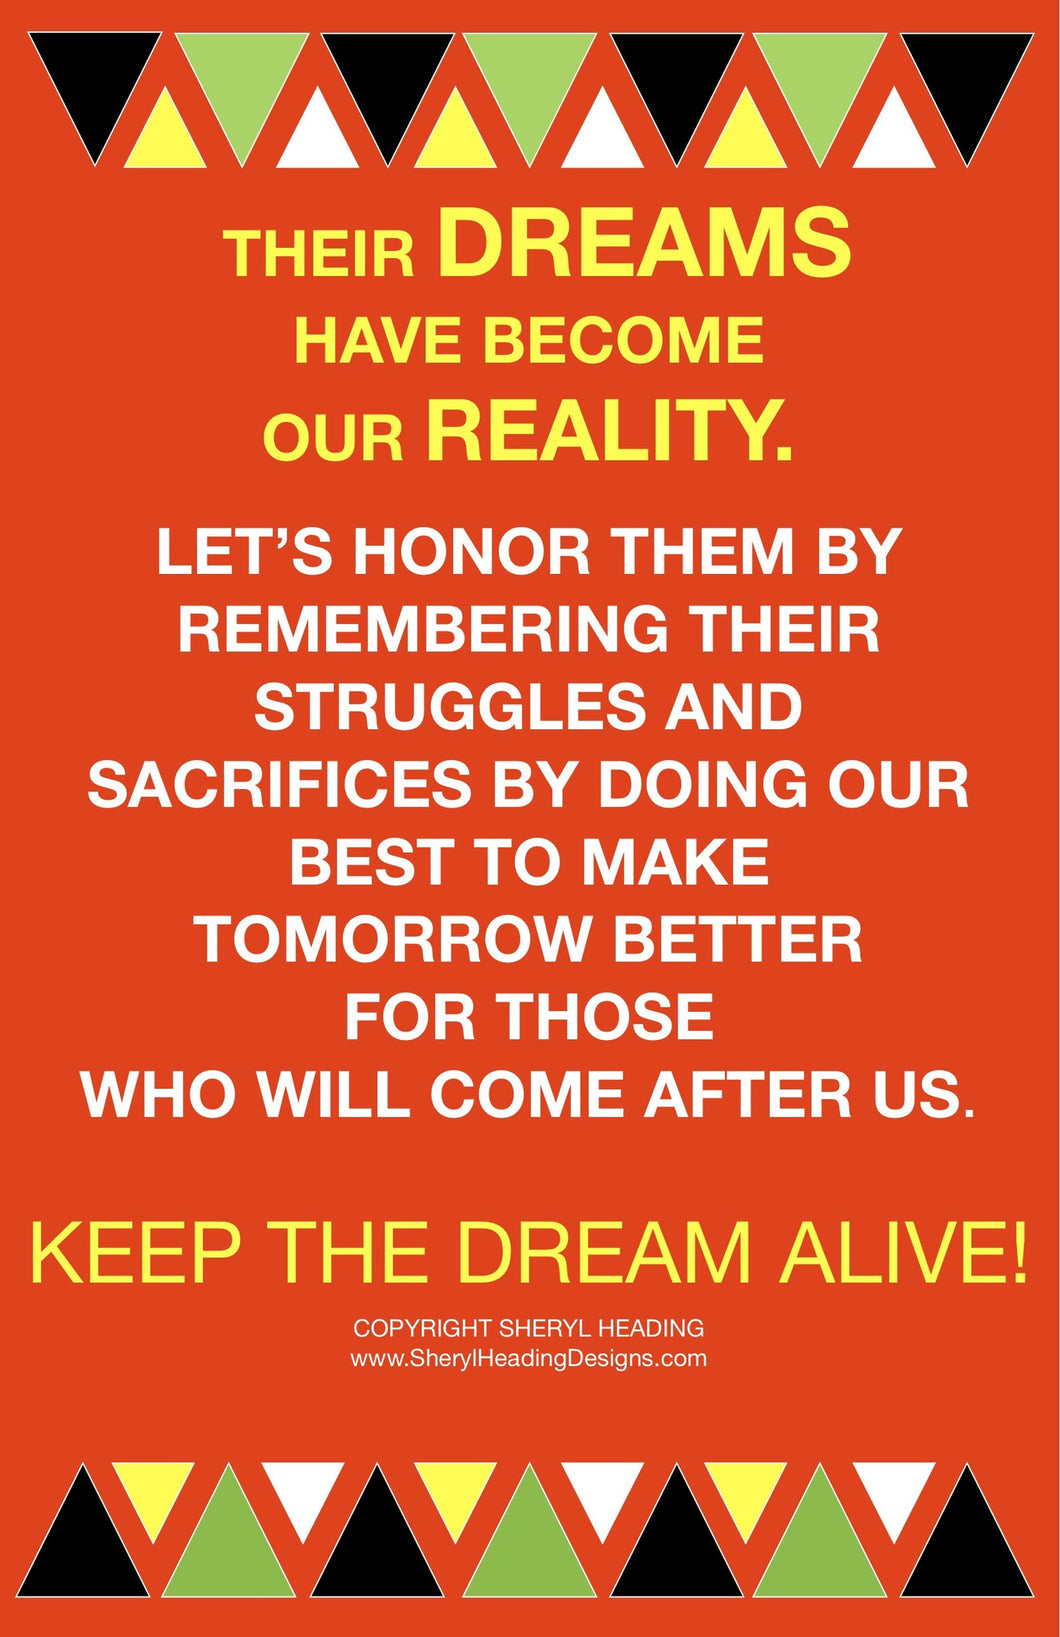 Their Dreams Have Become Our Reality Poster - Sheryl Heading Designs